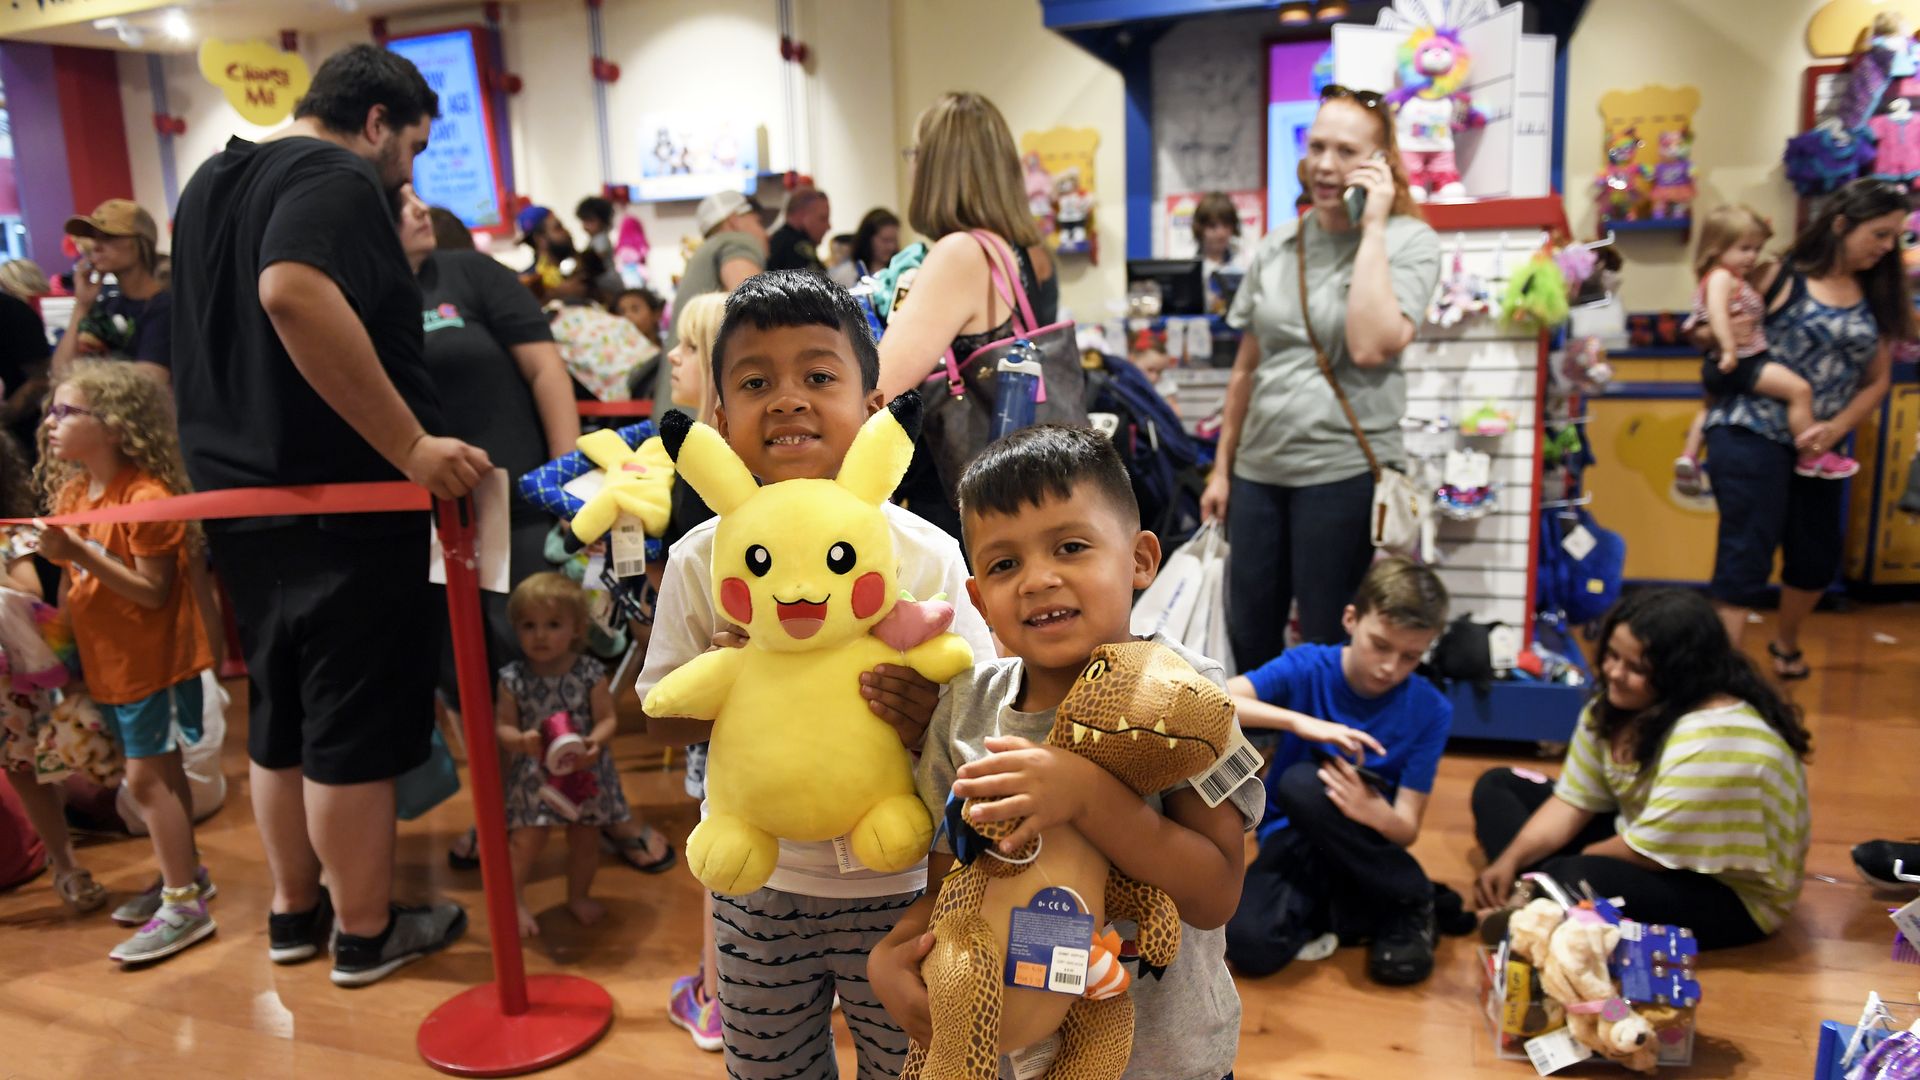 Two children pose with their plush toys at a Build-A-Bear store.